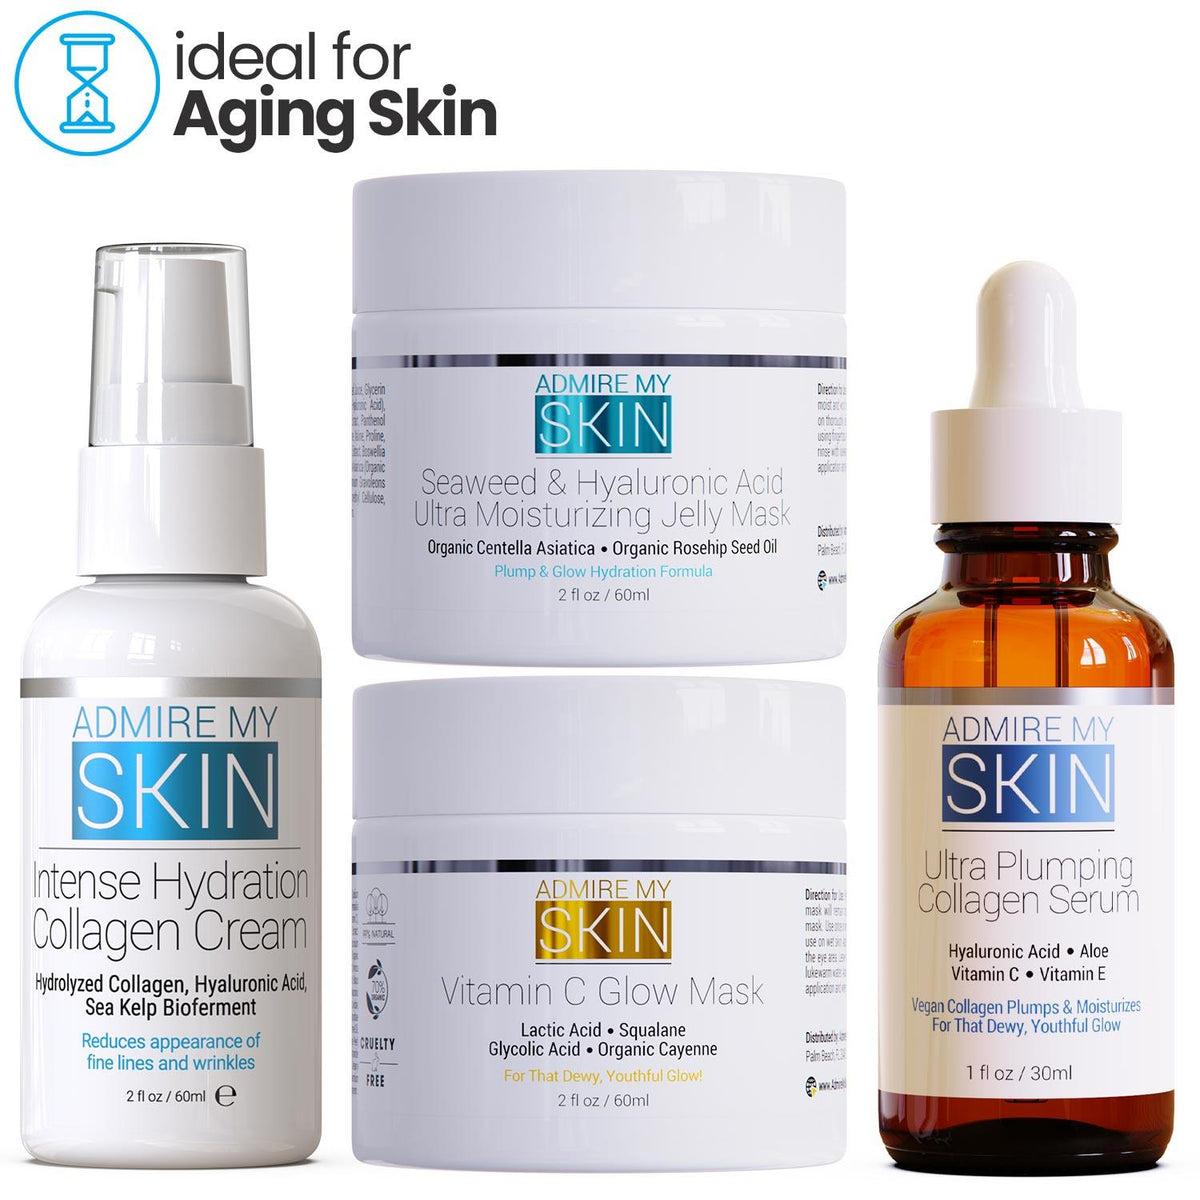 Anti Aging Cream, Mask & Serum For Youthful Glow— Skin Care Routine for Aging Skin - Admire My Skin